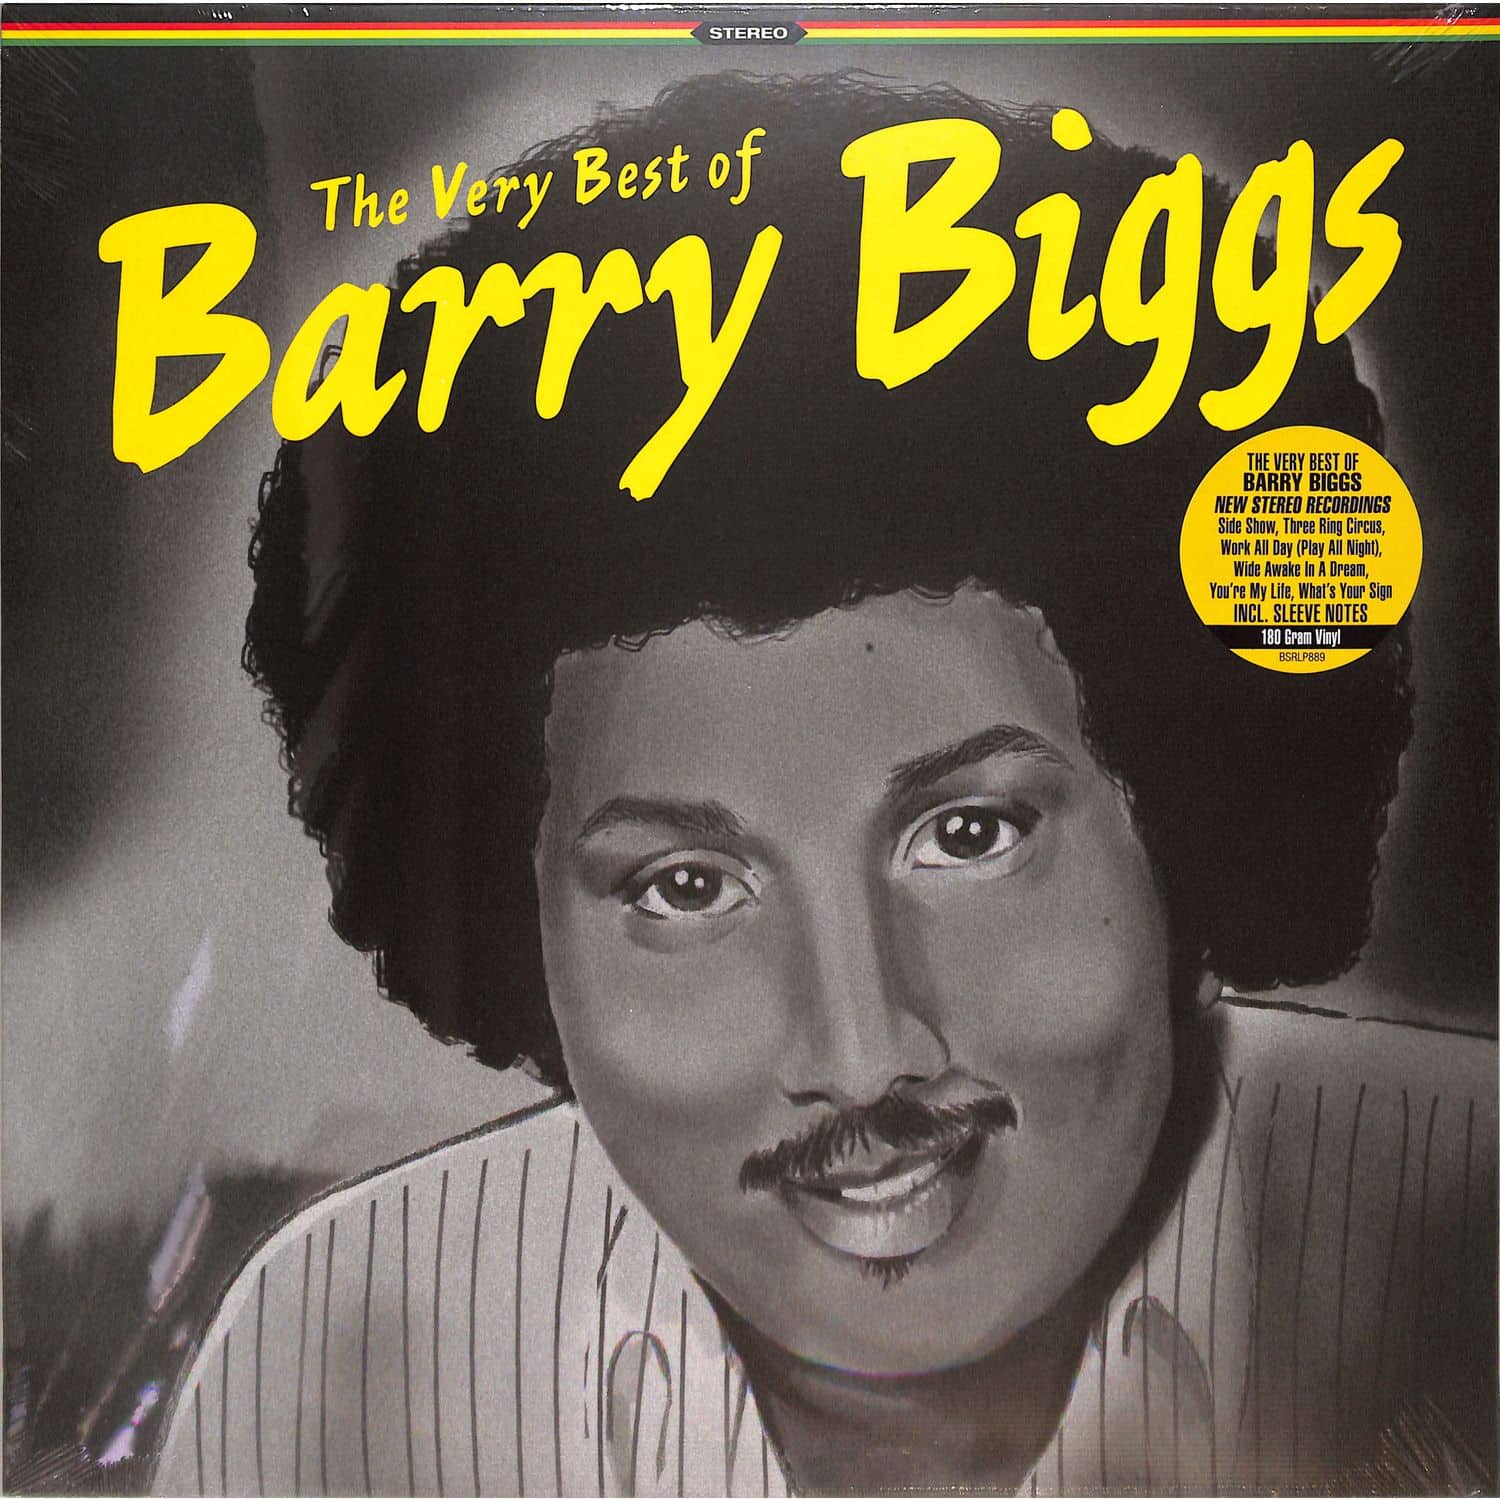 Barry Biggs - VERY BEST OF STORYBOOK REVISITED 